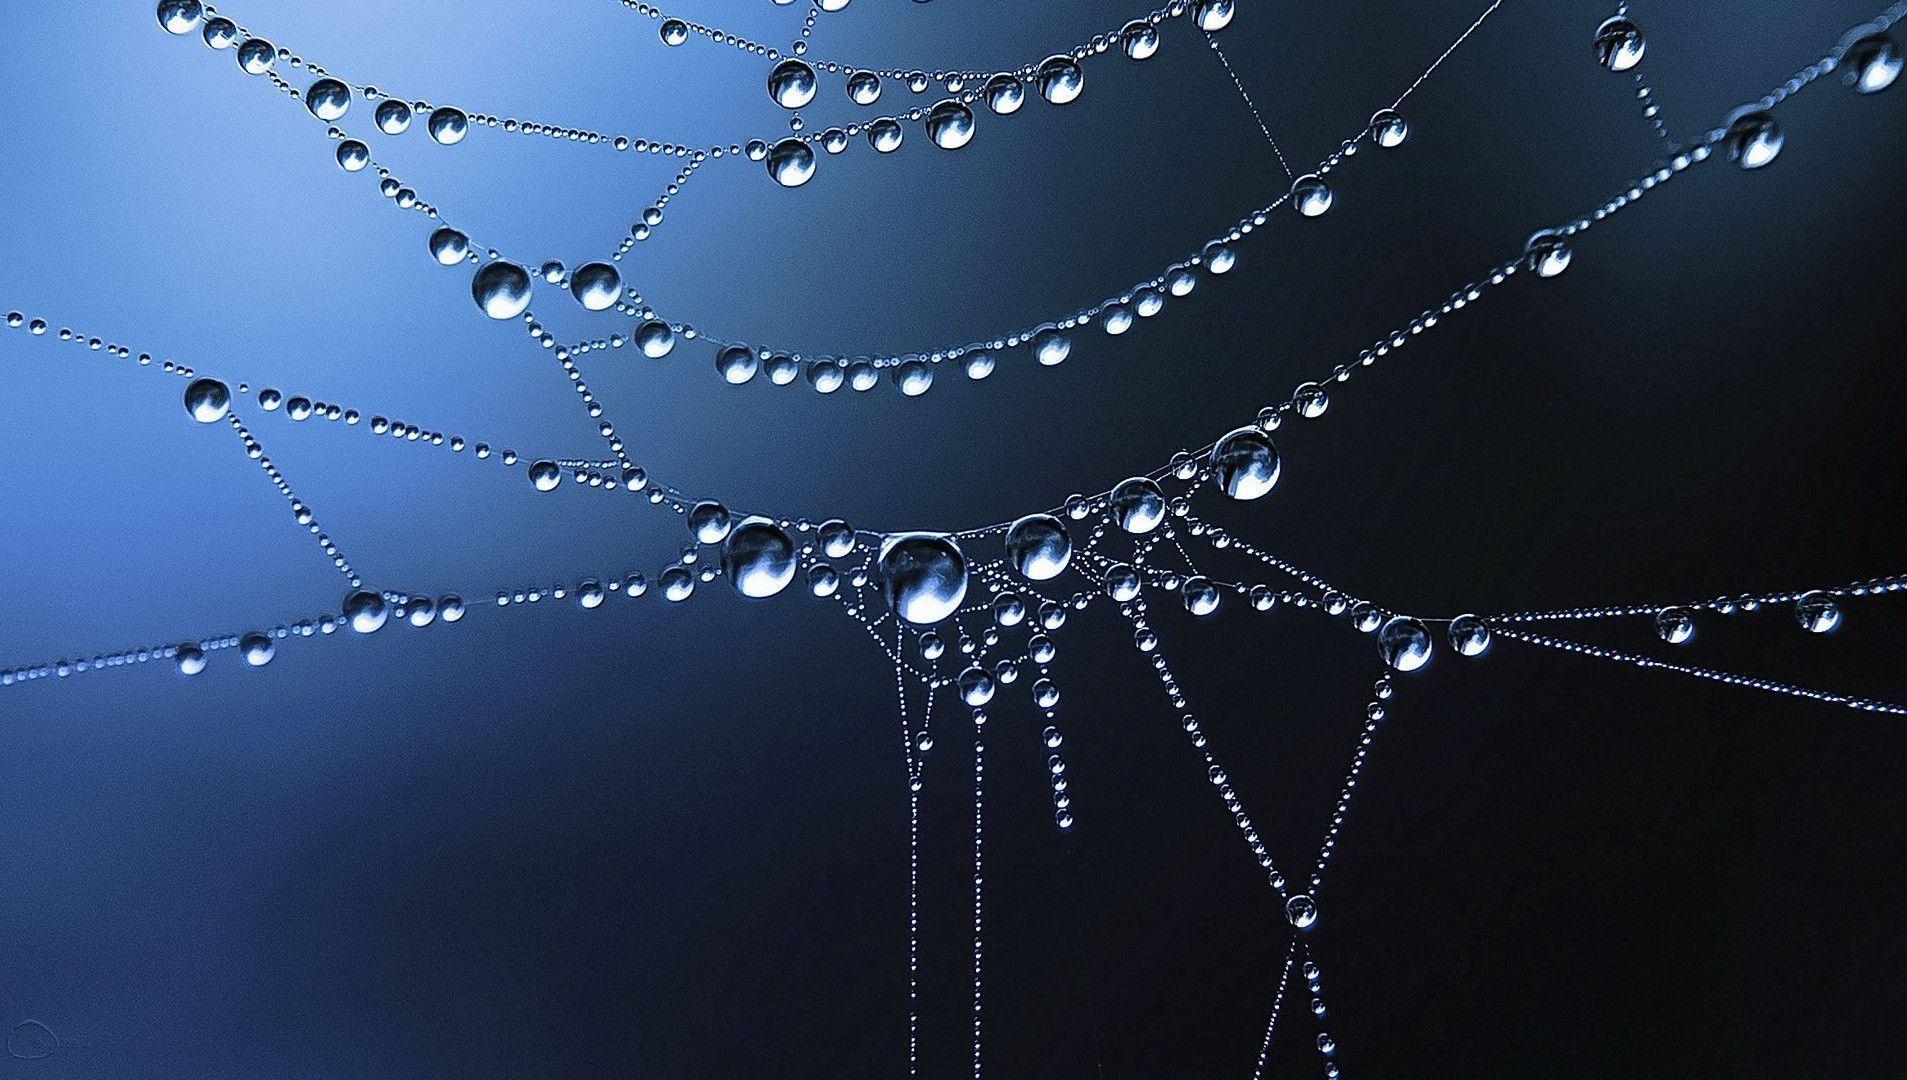 Frozen Waterdrops on Spider Web Free and Wallpaper